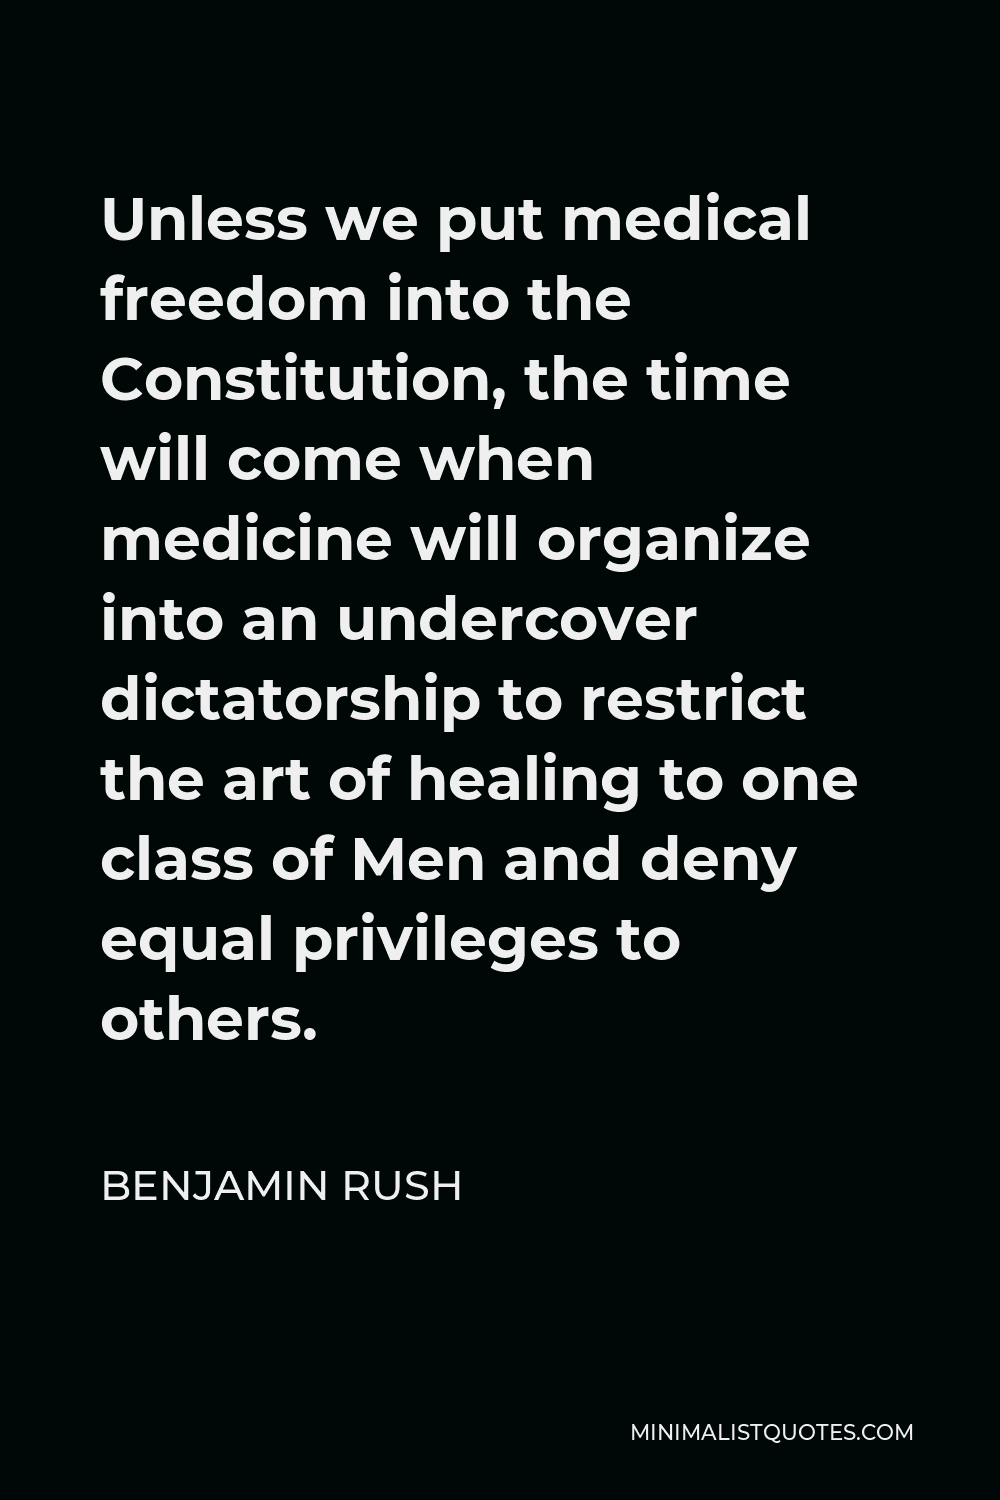 Benjamin Rush Quote - Unless we put medical freedom into the Constitution, the time will come when medicine will organize into an undercover dictatorship to restrict the art of healing to one class of Men and deny equal privileges to others.